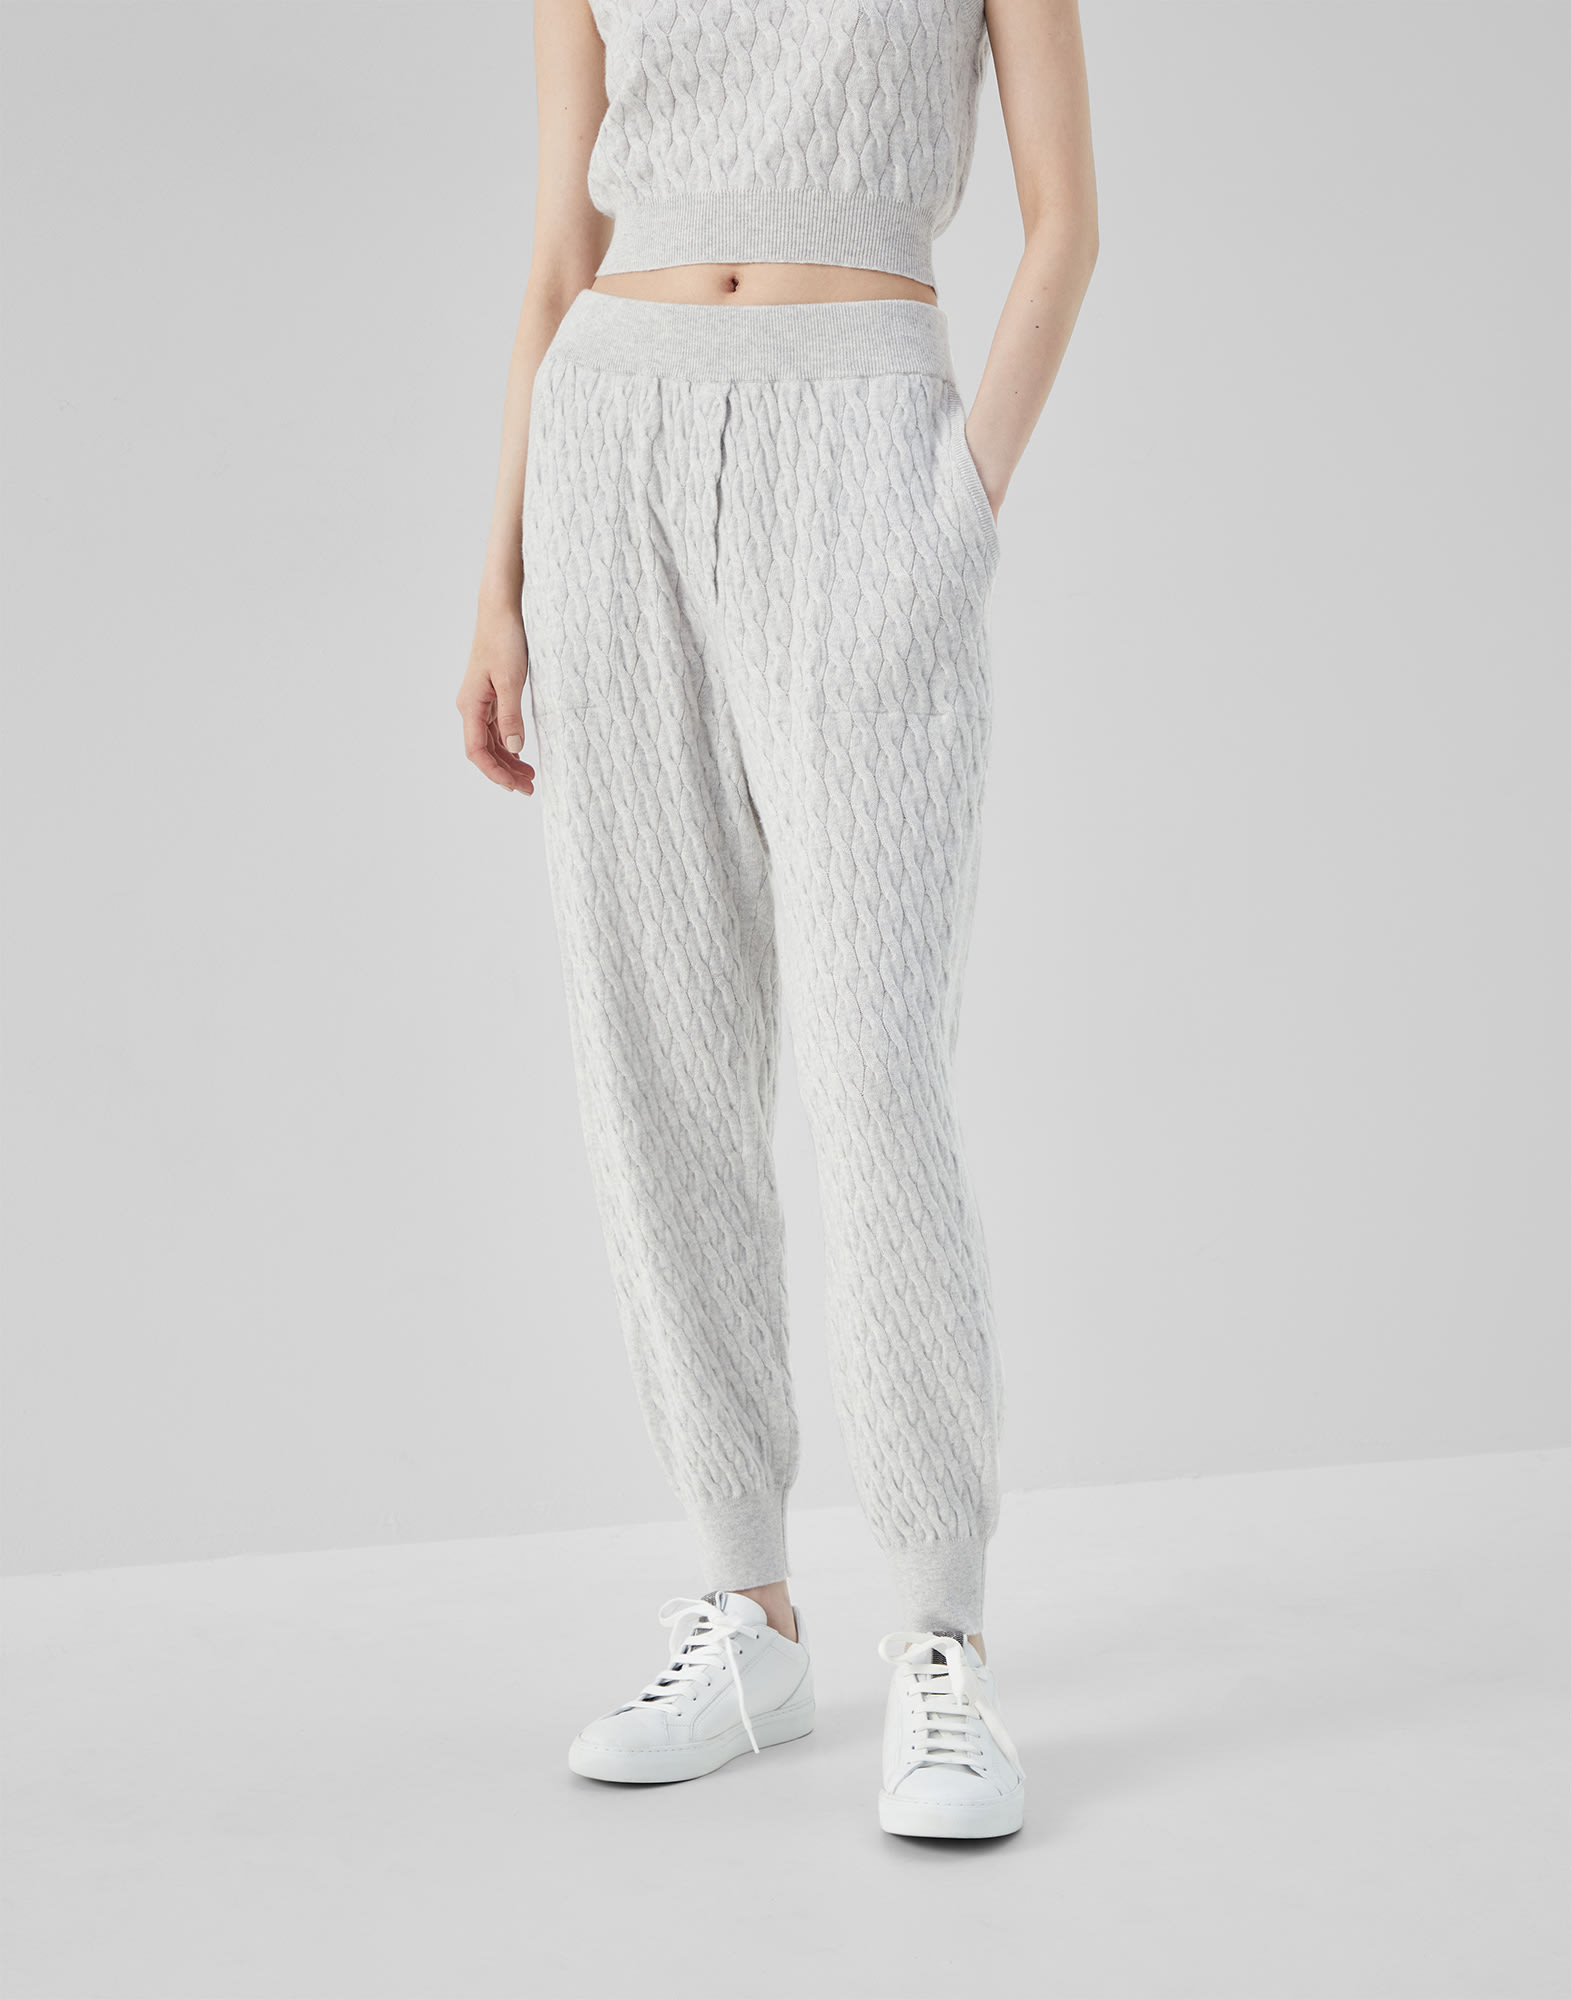 Knit Pants - Front view